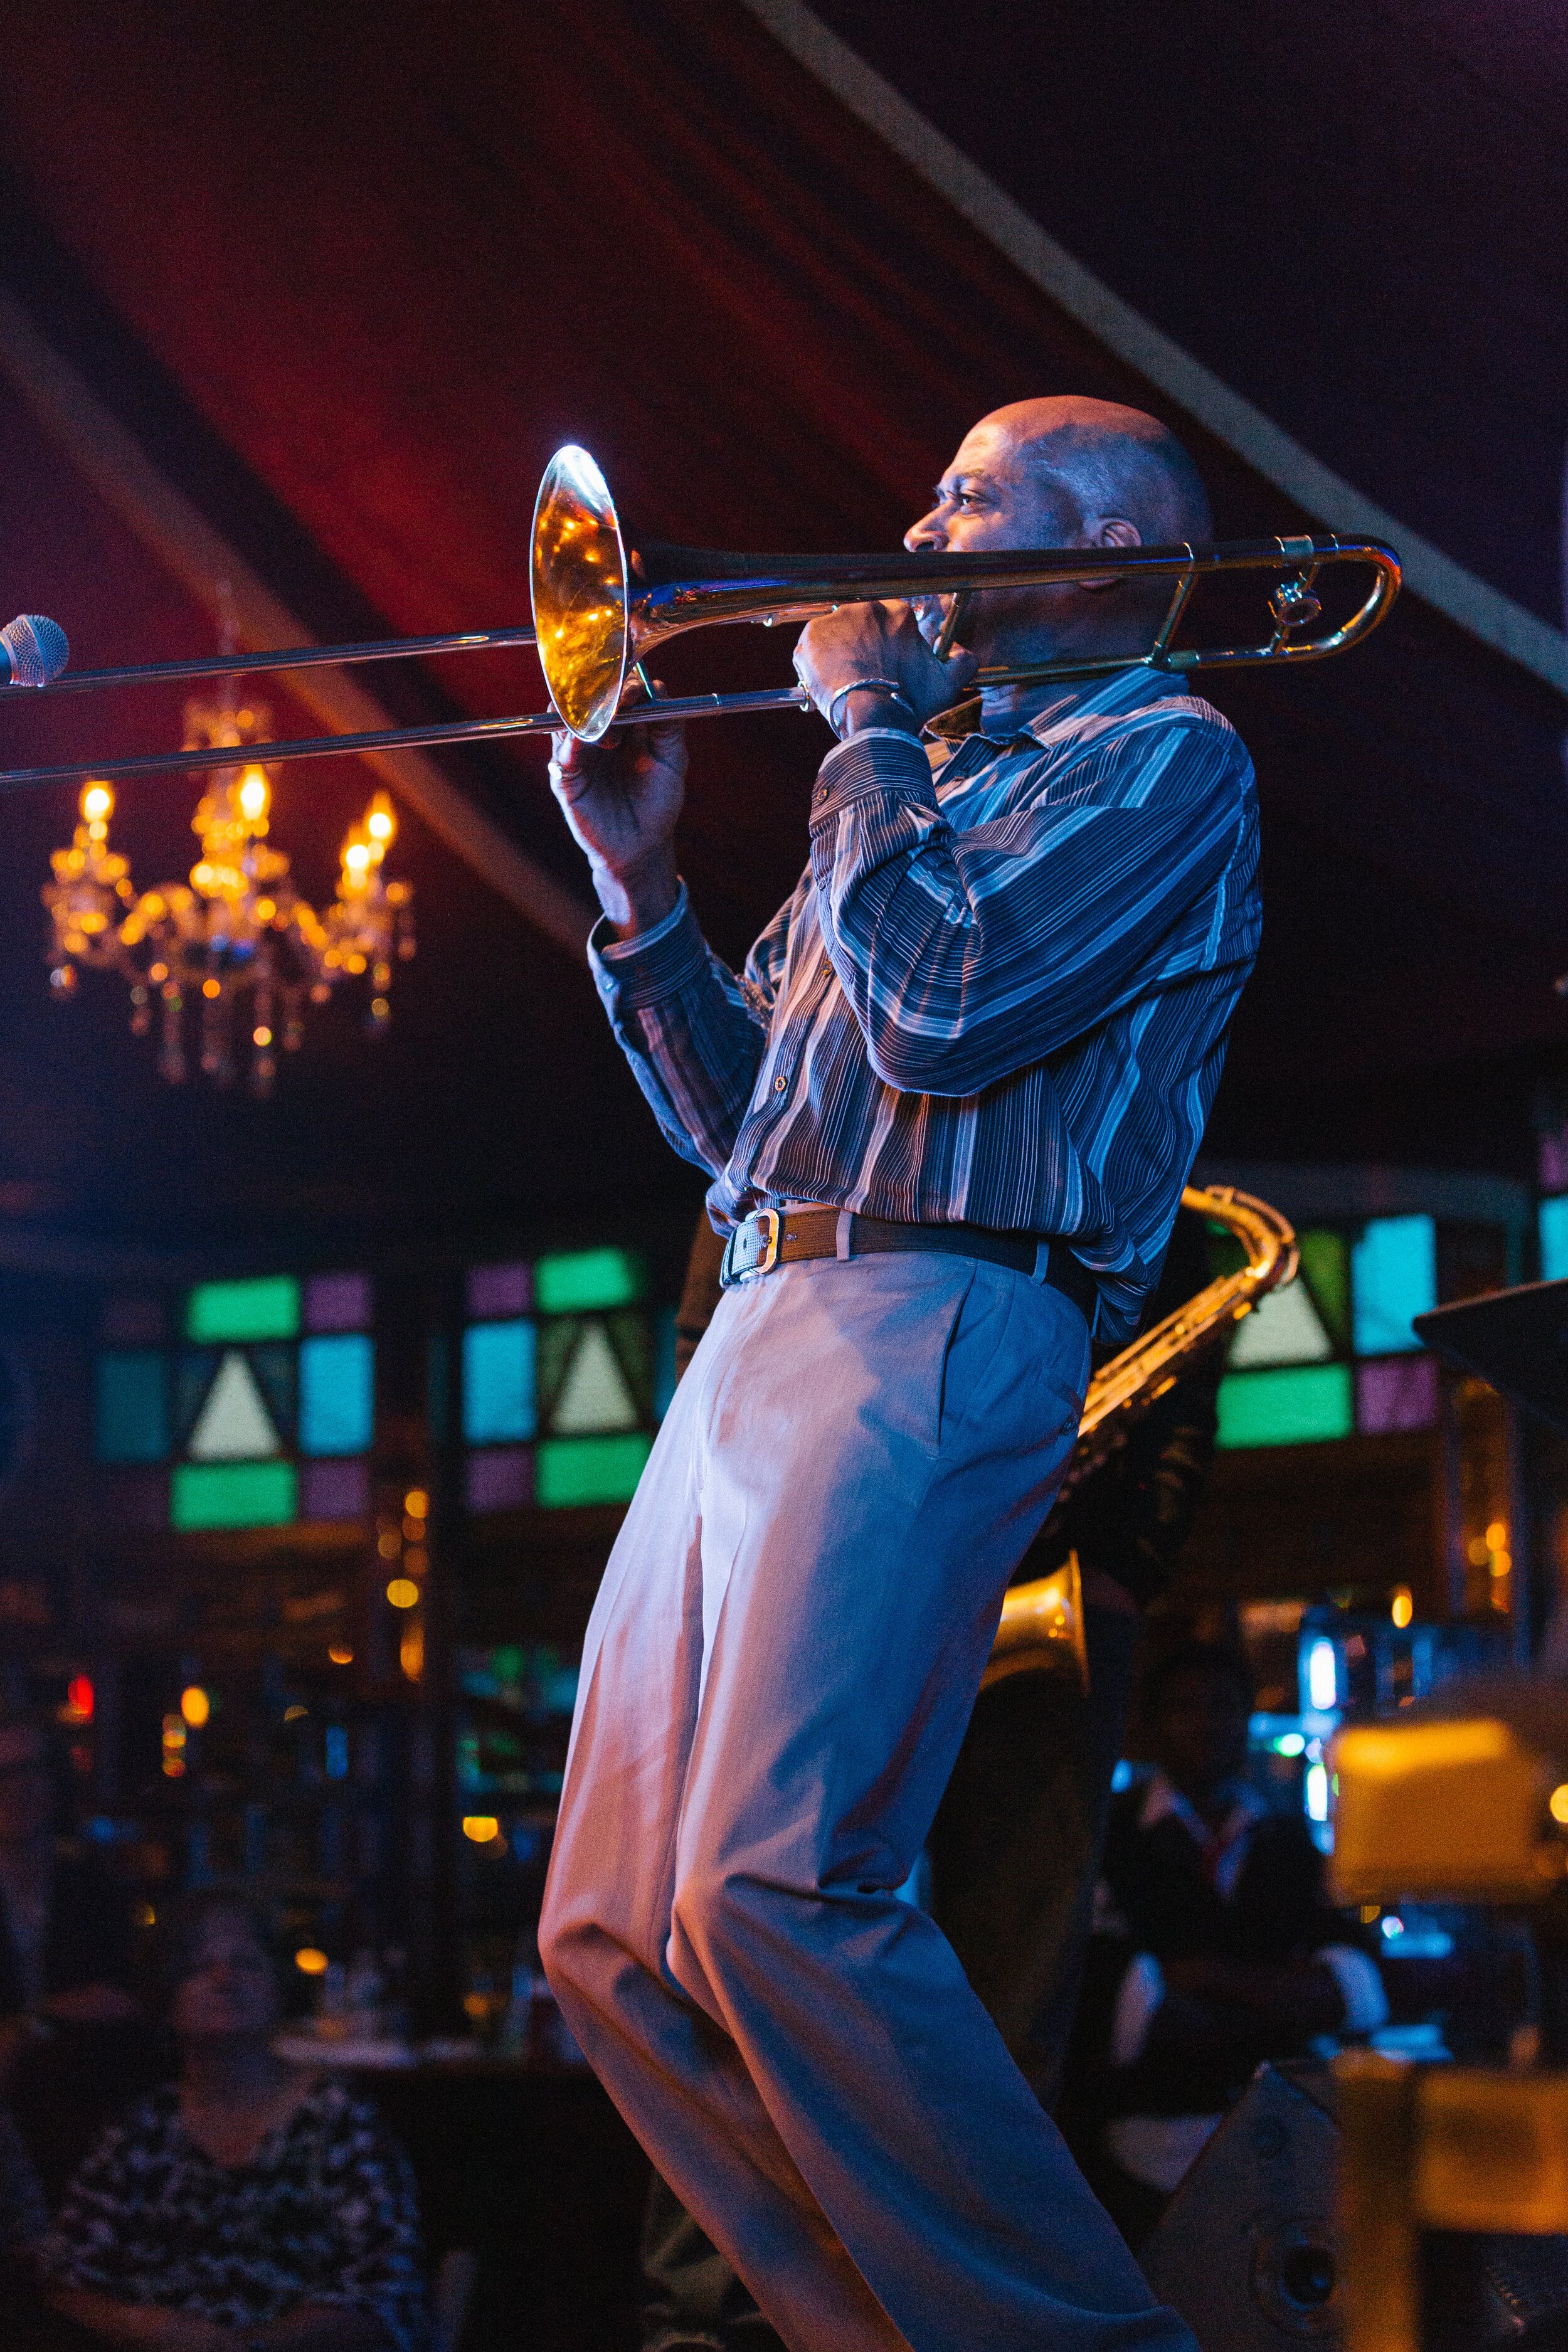 Trombonist plays a solo in the opening minutes of the Harlem on the Hudson Experience at the Bard Spiegeltent.jpg